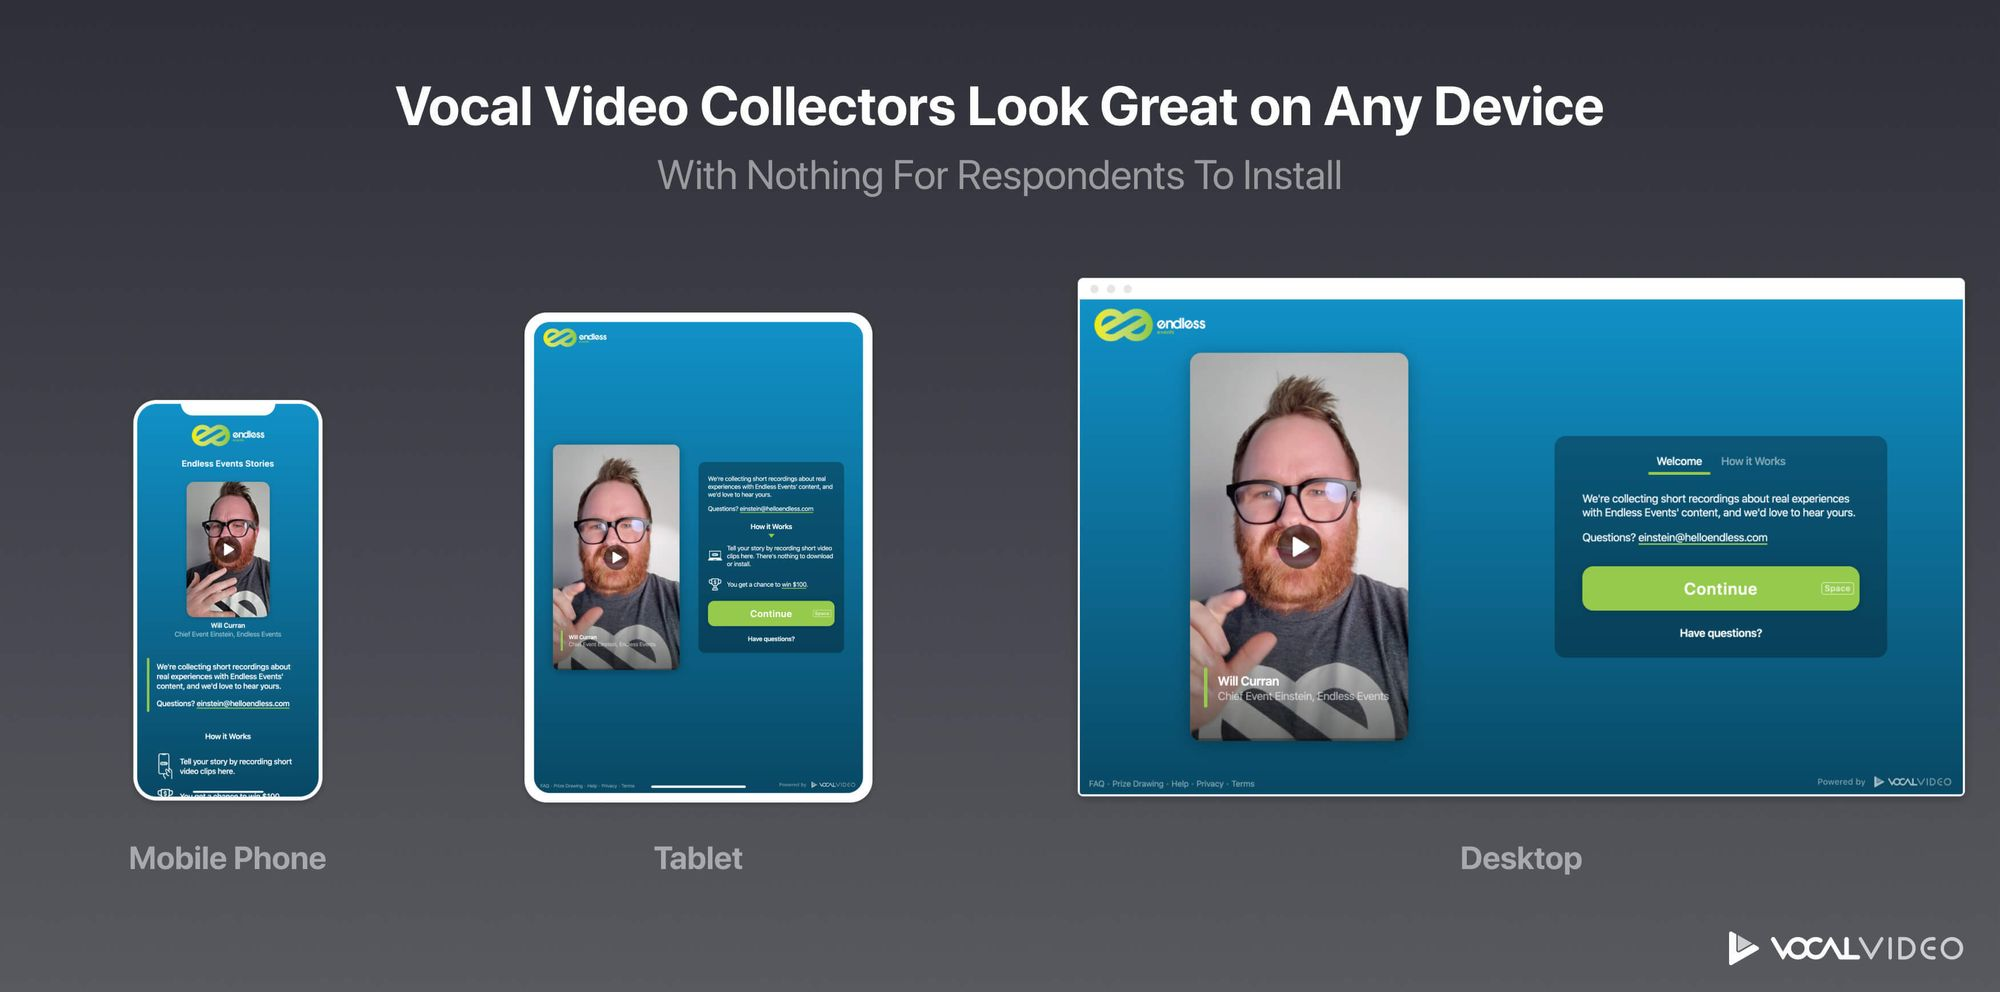 Vocal Video Collectors Look Great on Any Device: Mobile Phone, Tablet, or Desktop